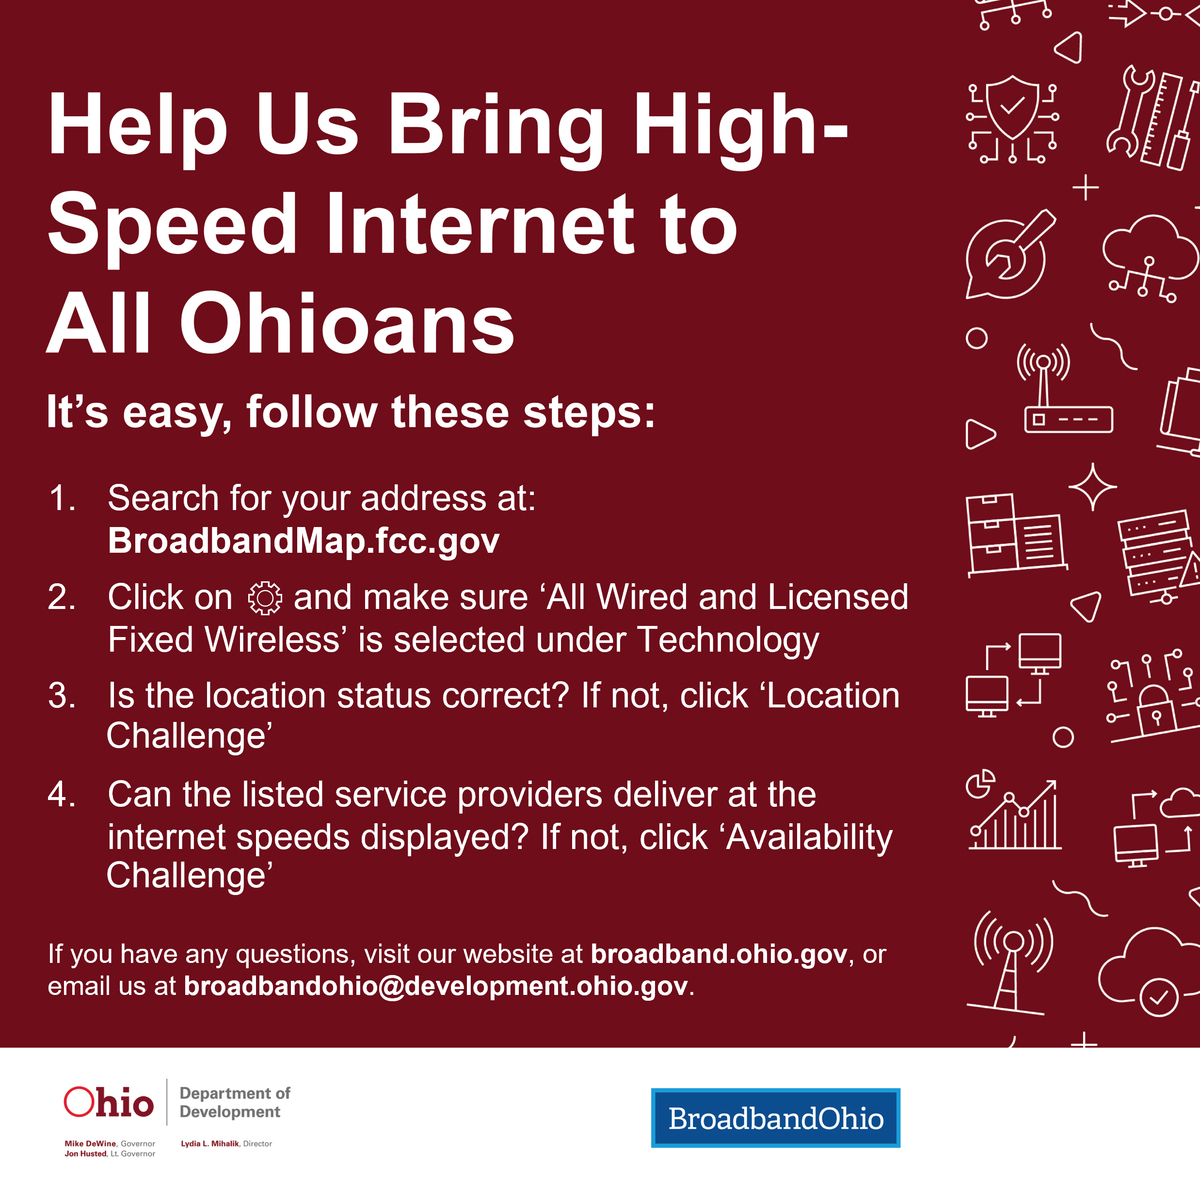 jpg that describes how to help bring high-speed internet to all of ohio.